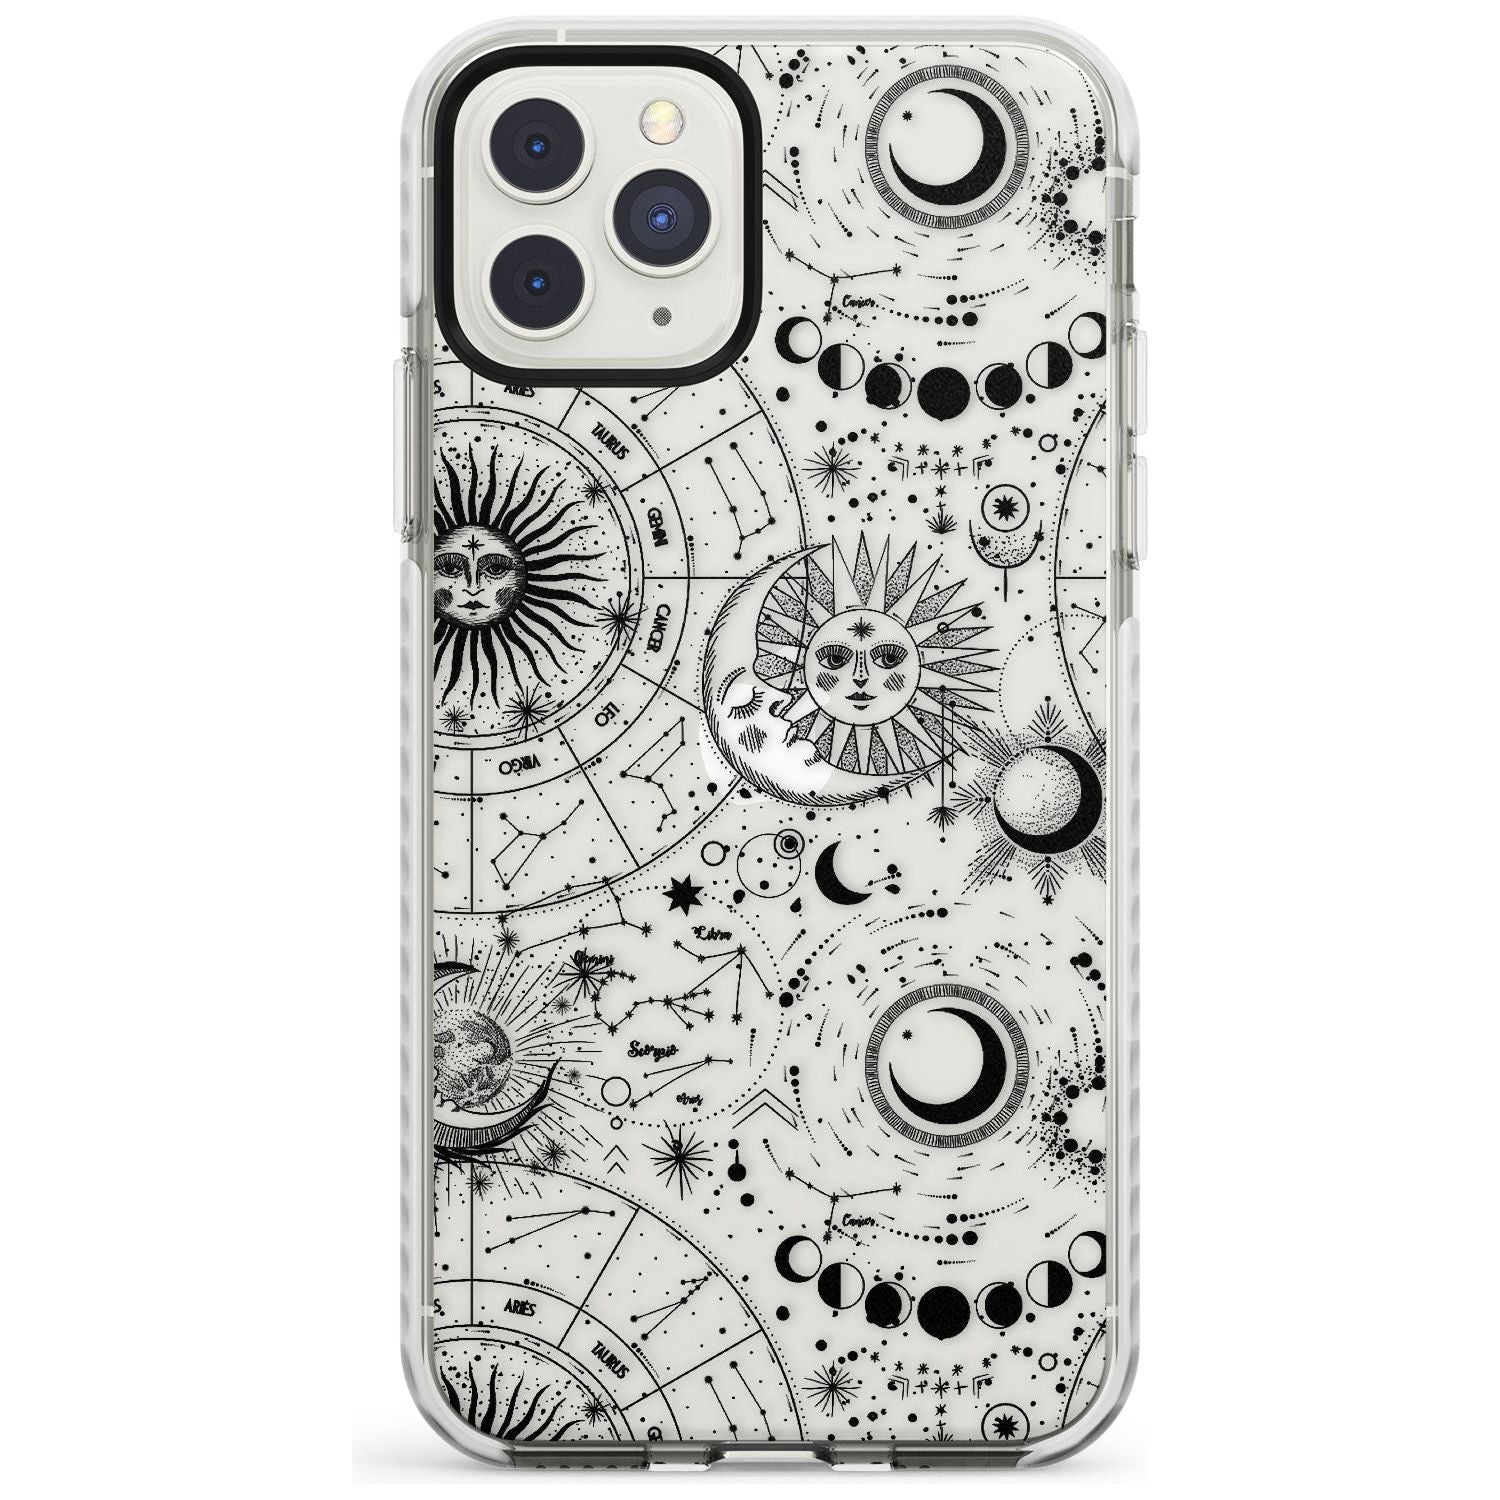 Suns, Moons, Zodiac Signs Astrological Impact Phone Case for iPhone 11 Pro Max